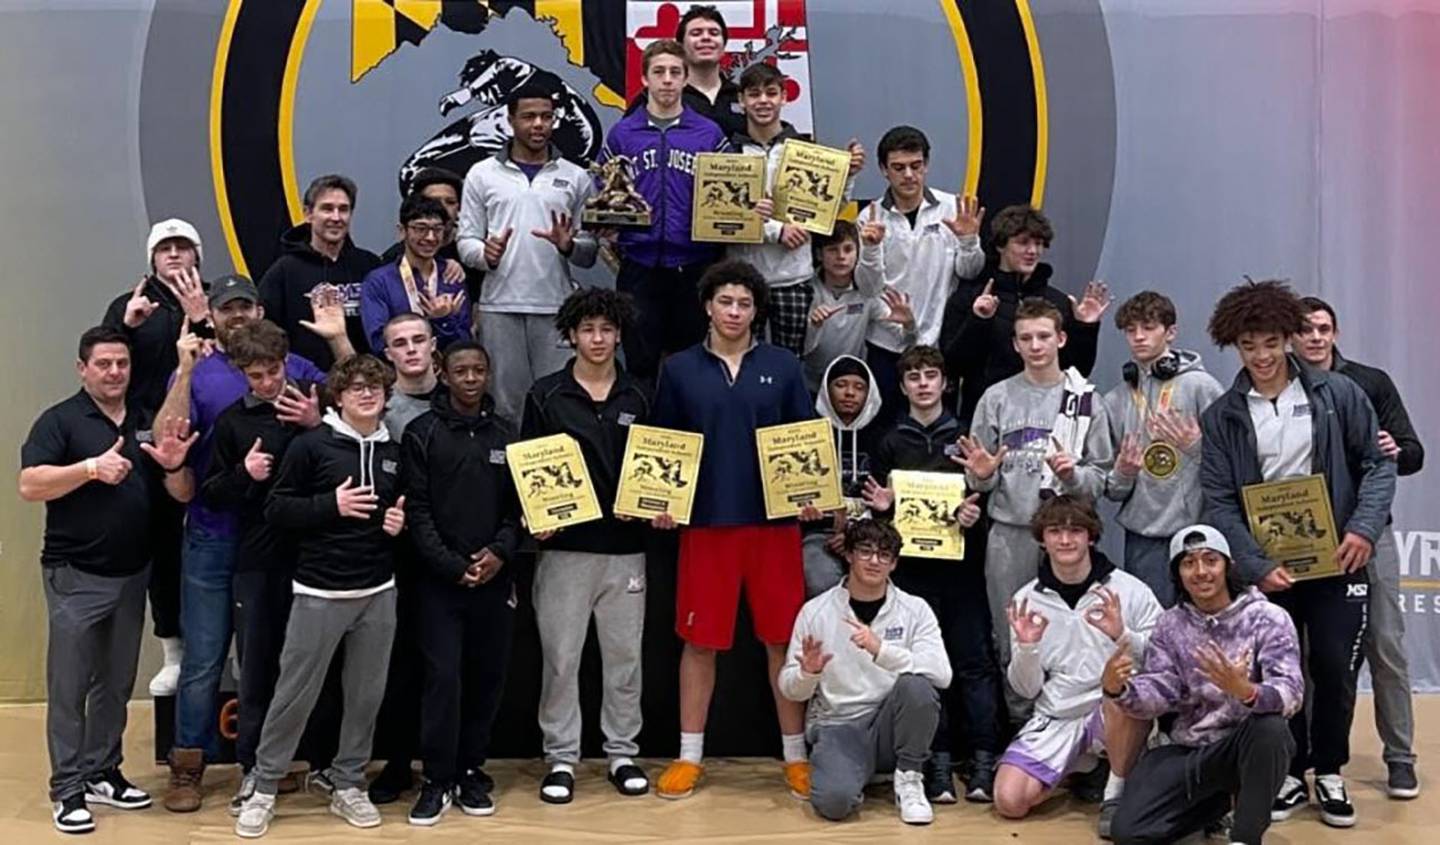 The Mount St. Joseph wrestling team continues to be the area's most dominant as the Gaels collected their sixth consecutive Maryland Independent Schools state tournament championship.